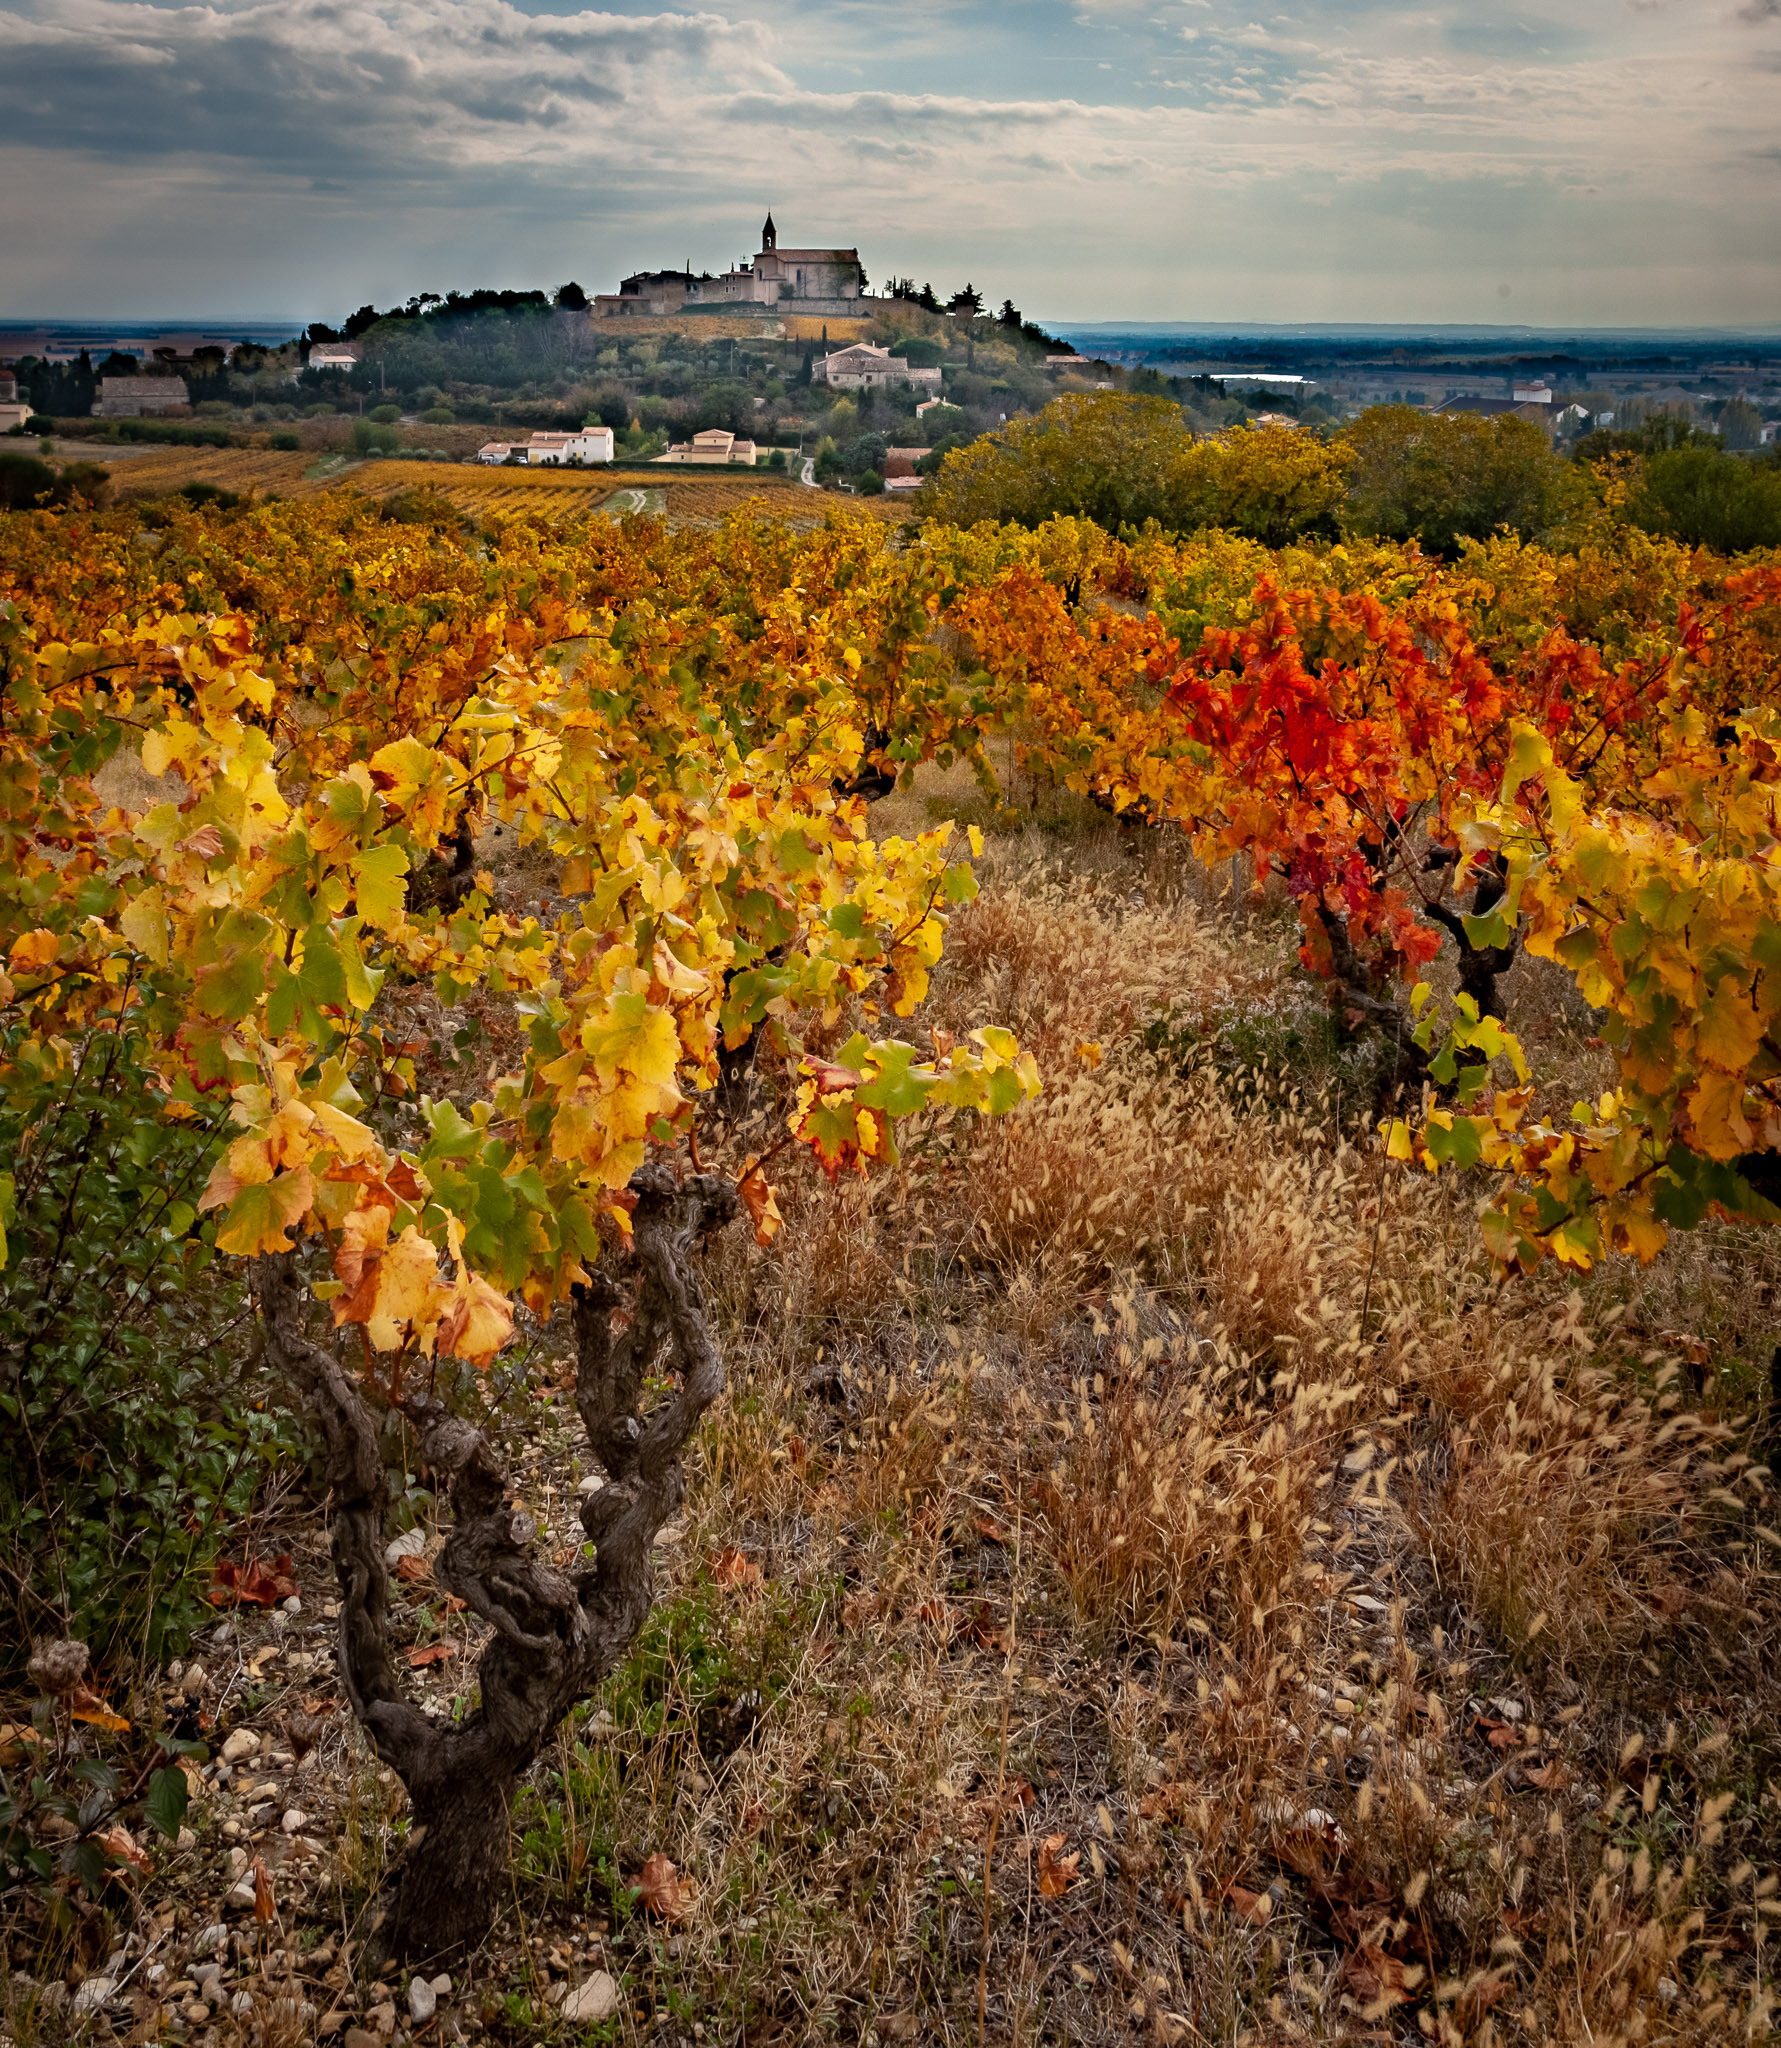 Autumn in Cairanne, France